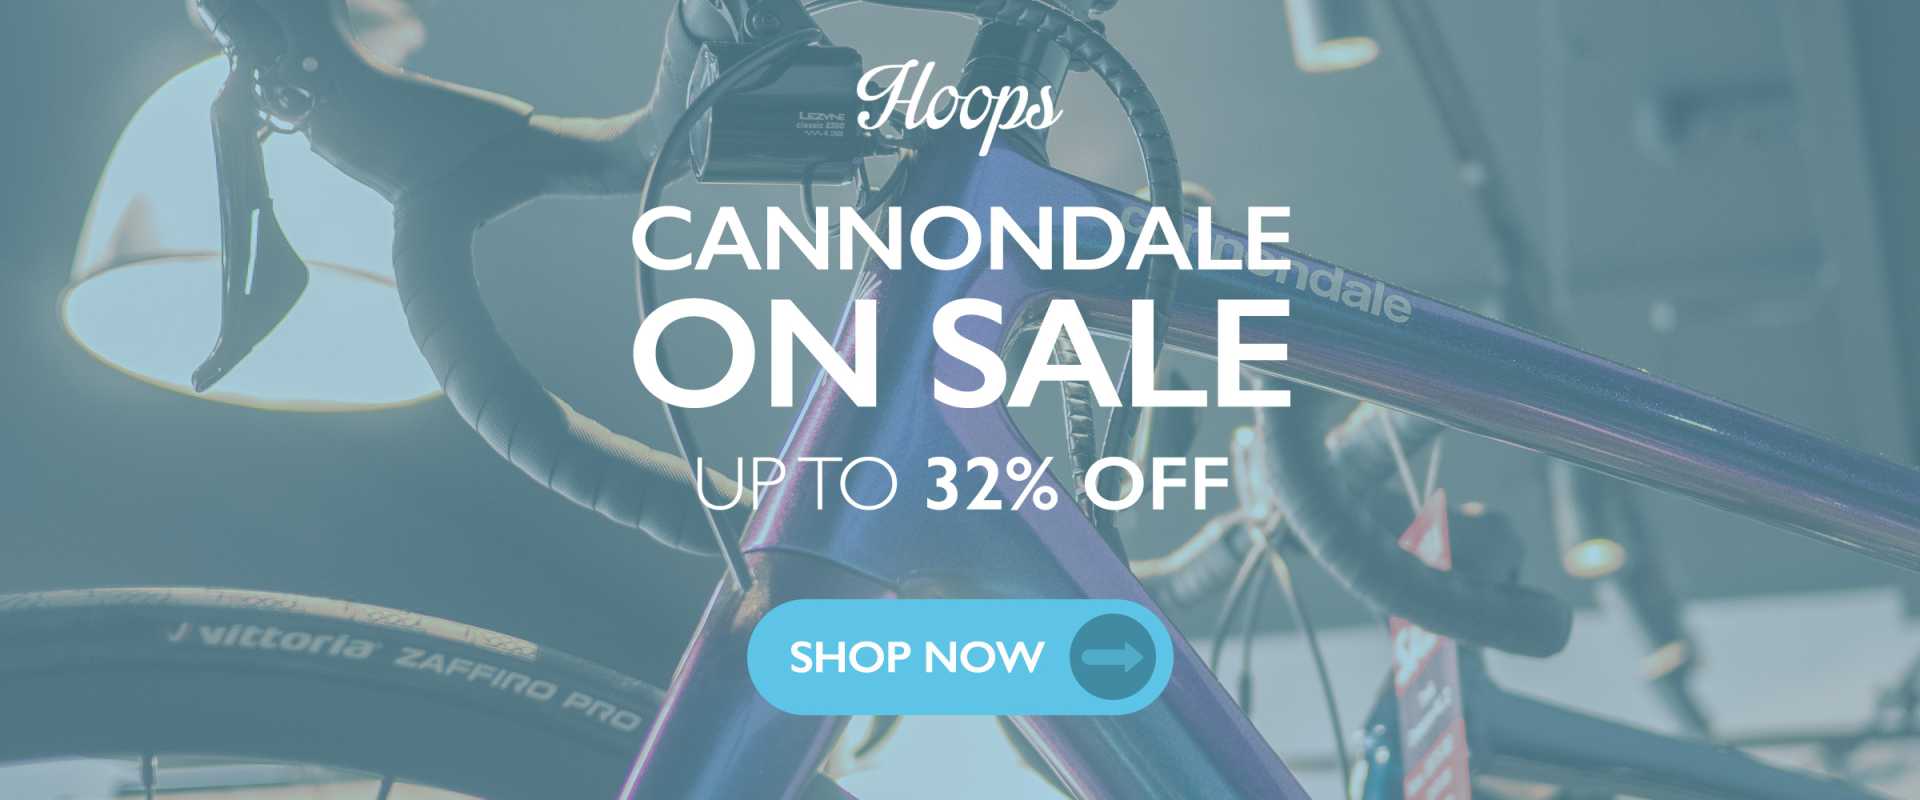 Cannondale On Sale